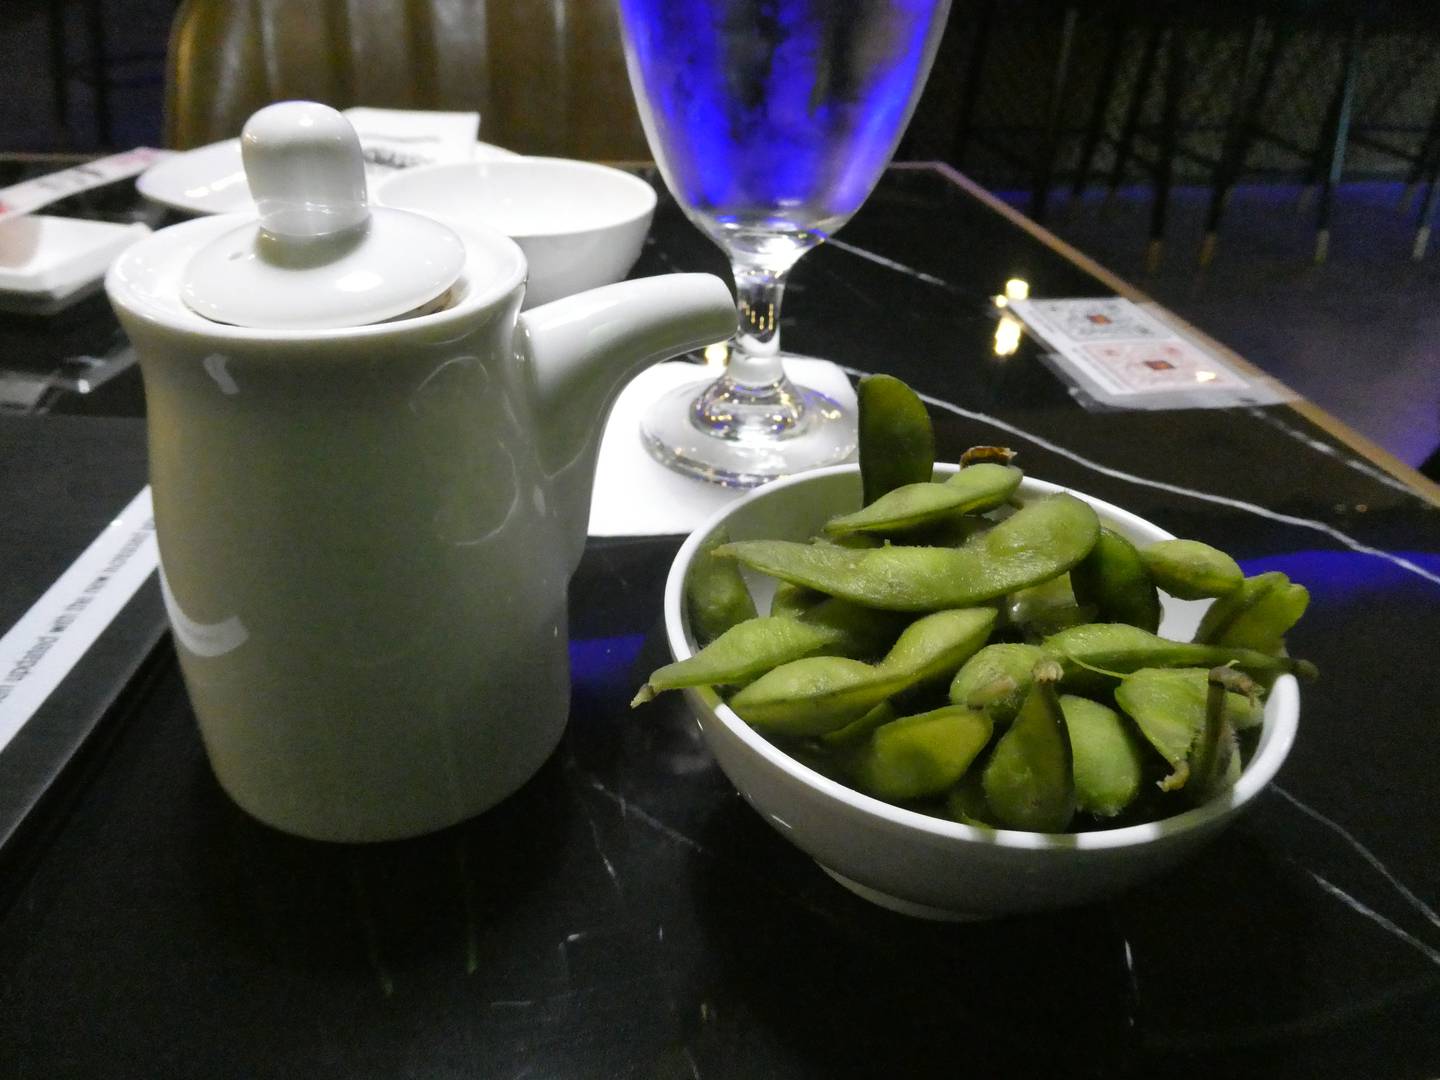 Tea and edamame at Tasty Bistro in Crystal Lake.